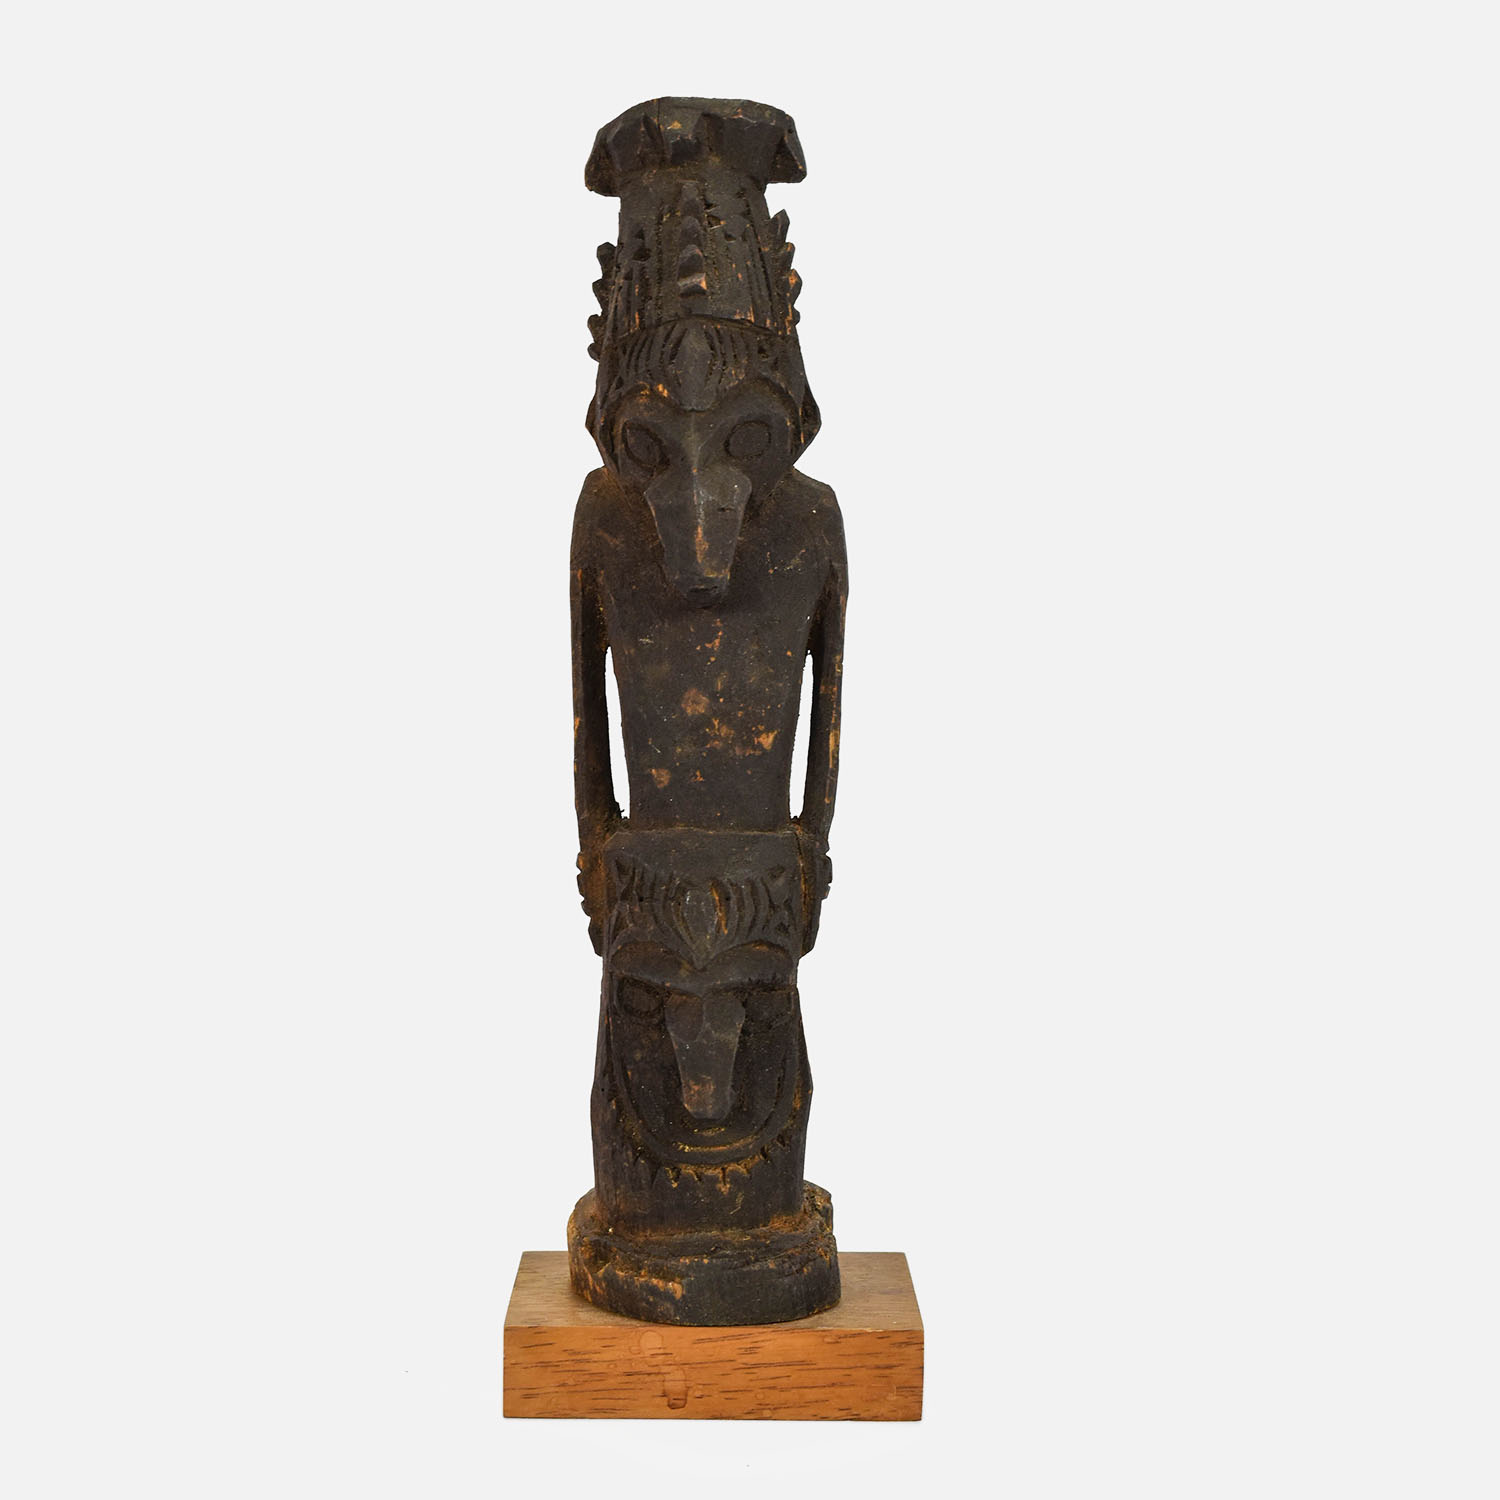 Pacific Islands Oceania Carved Wood Totem Figure